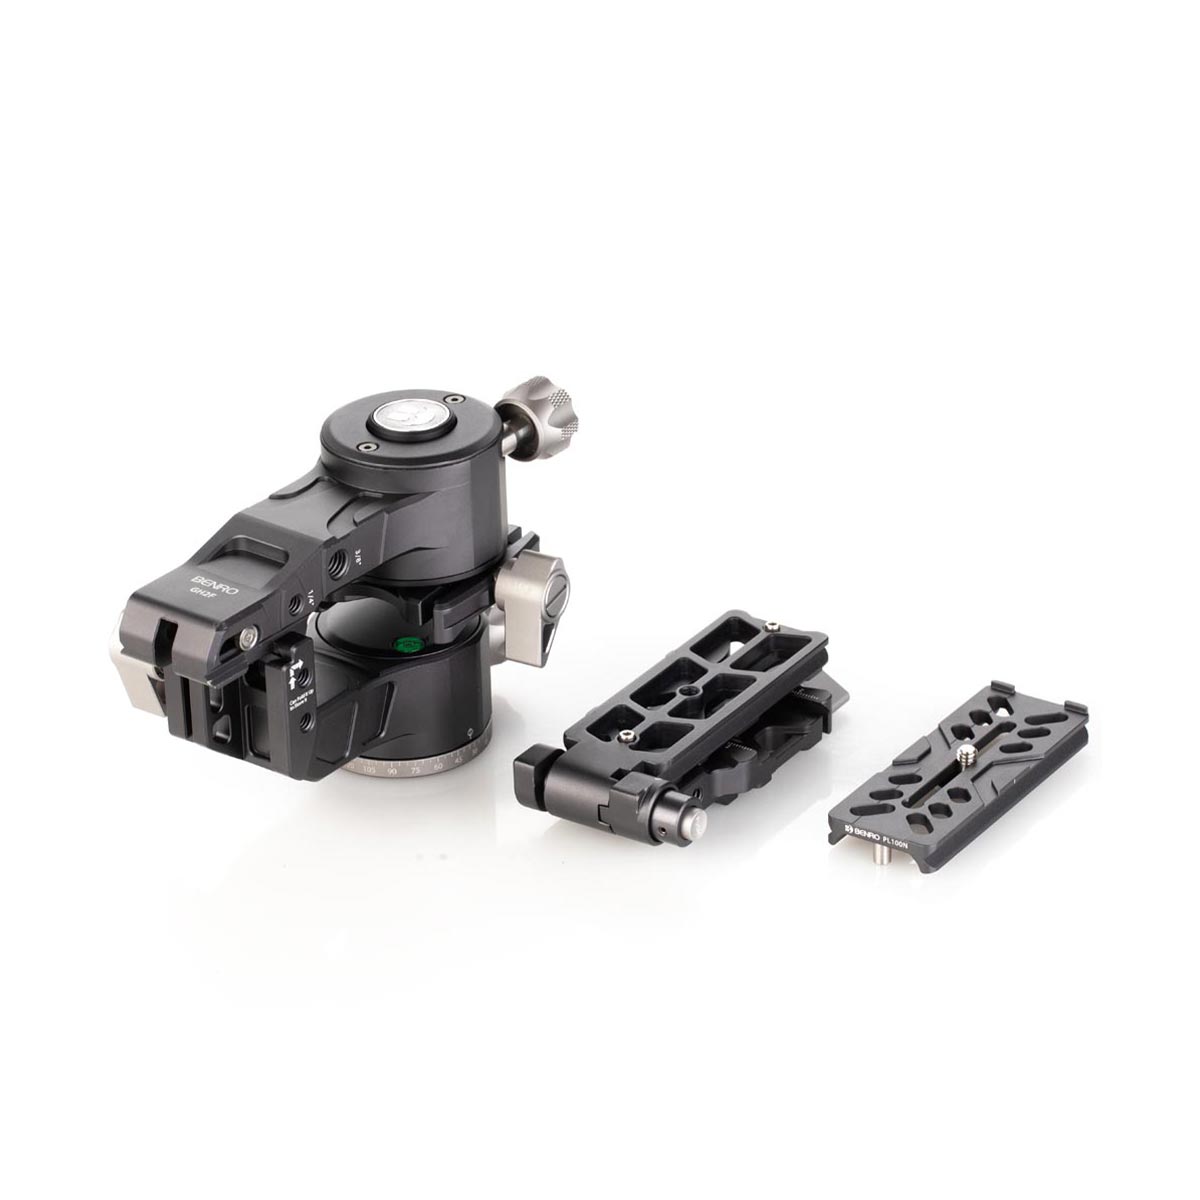 Benro Folding Gimbal Head with Arca-Type Quick Release Plate